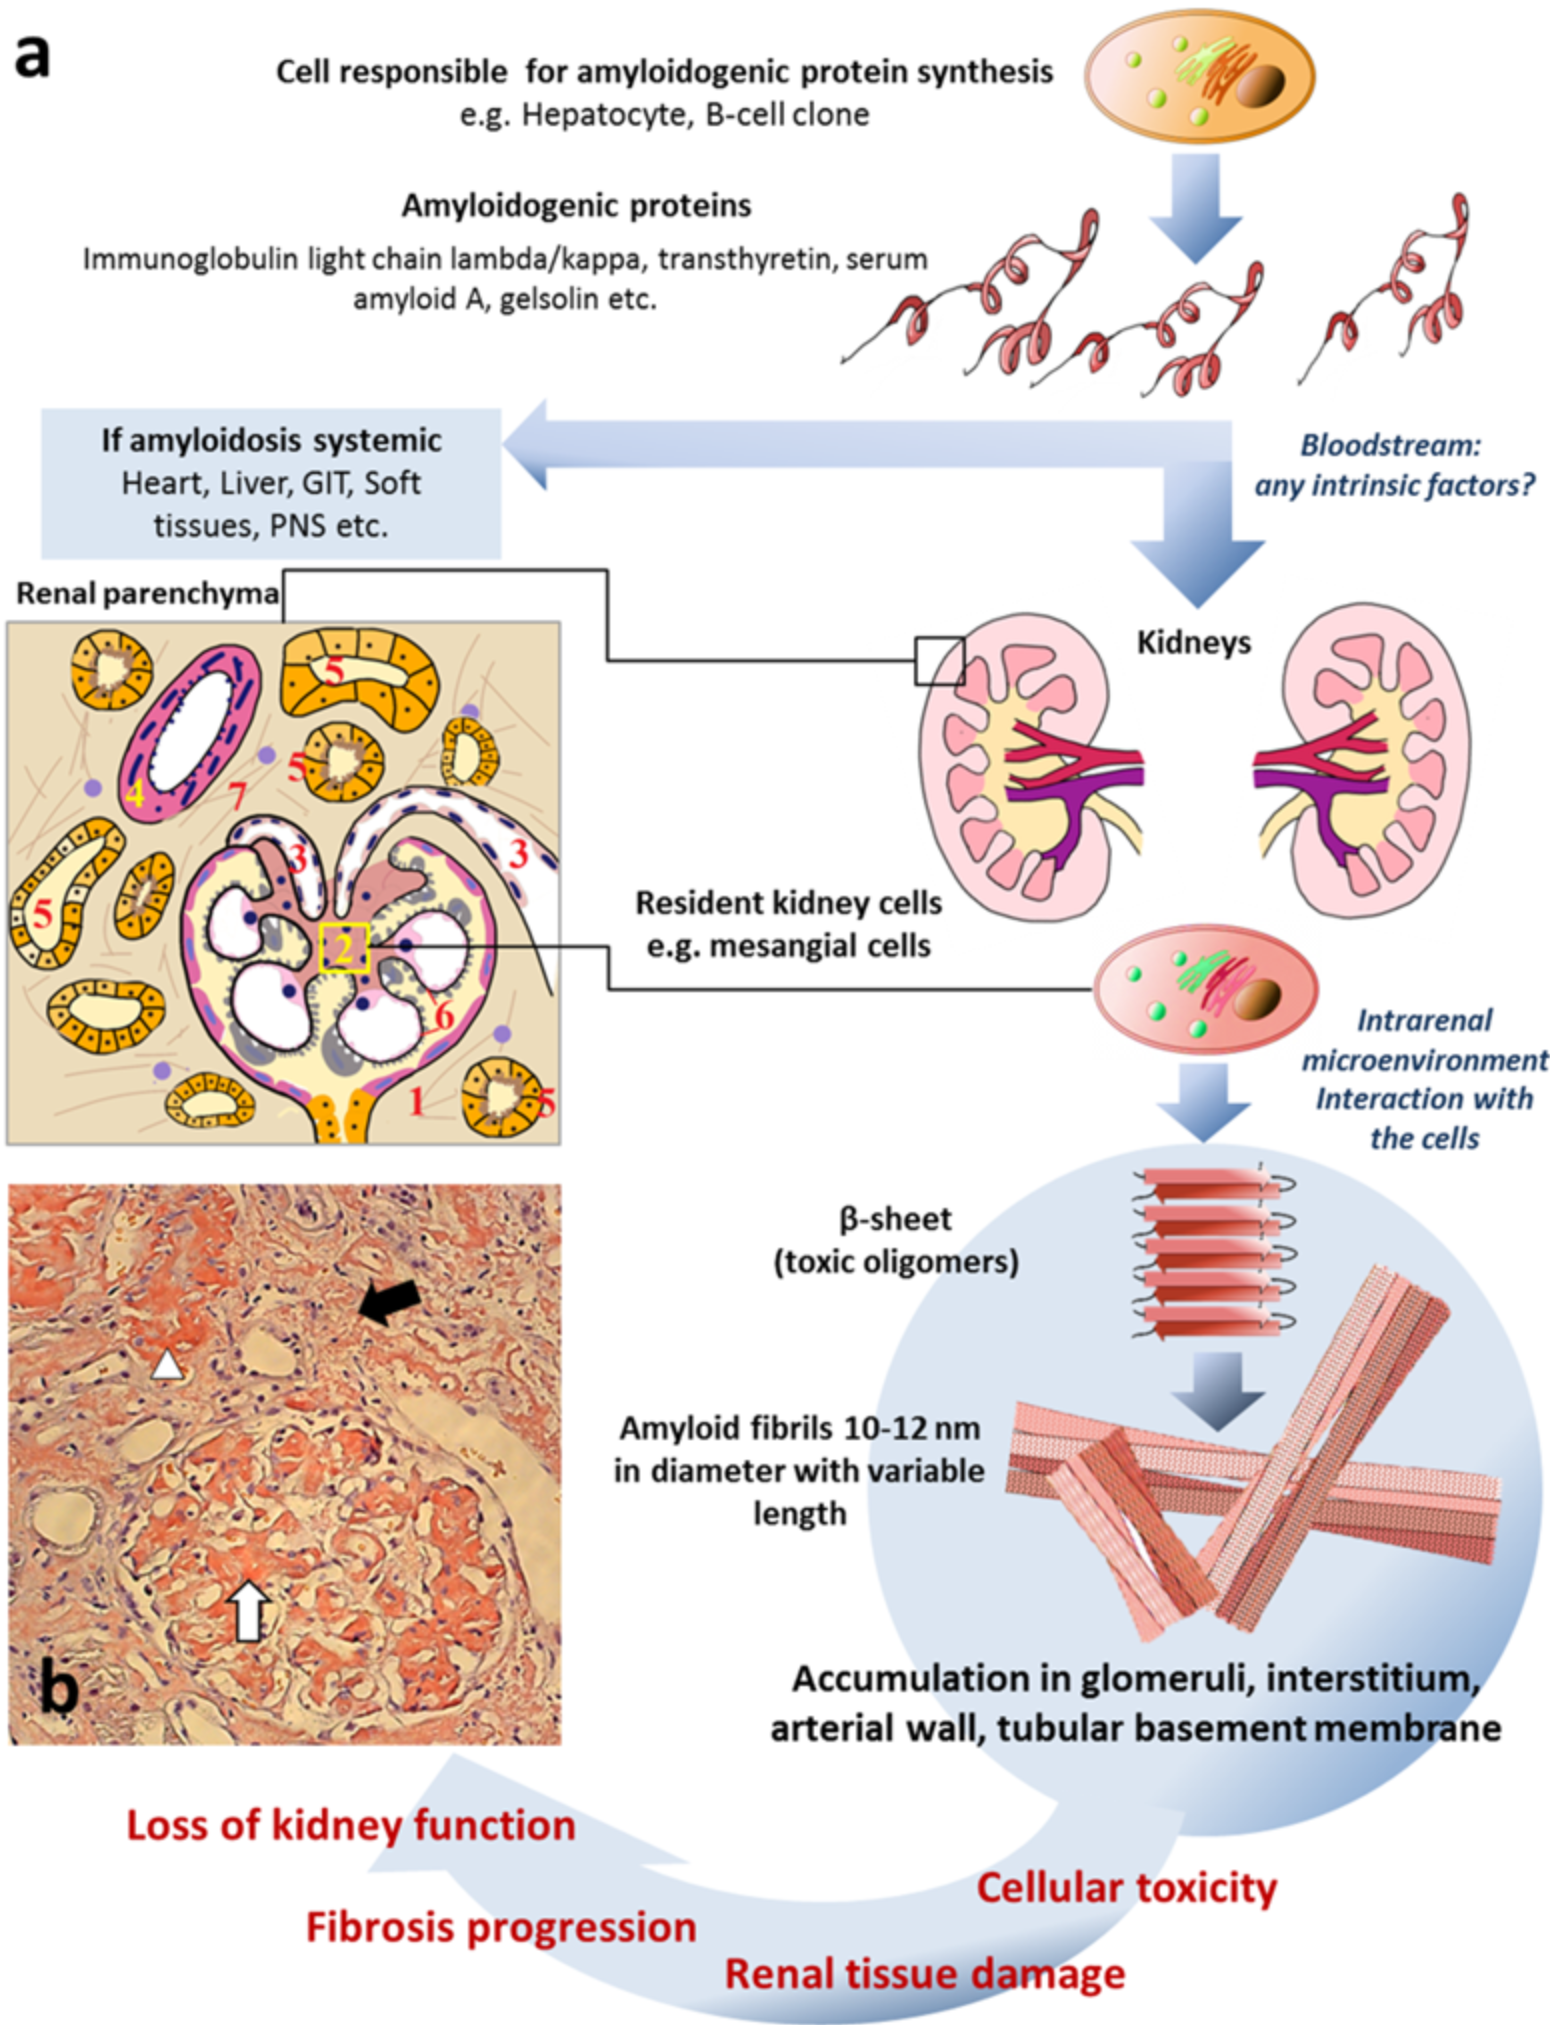 IJMS | Free Full-Text | Noninvasive Diagnostics of Renal Amyloidosis:  Current State and Perspectives